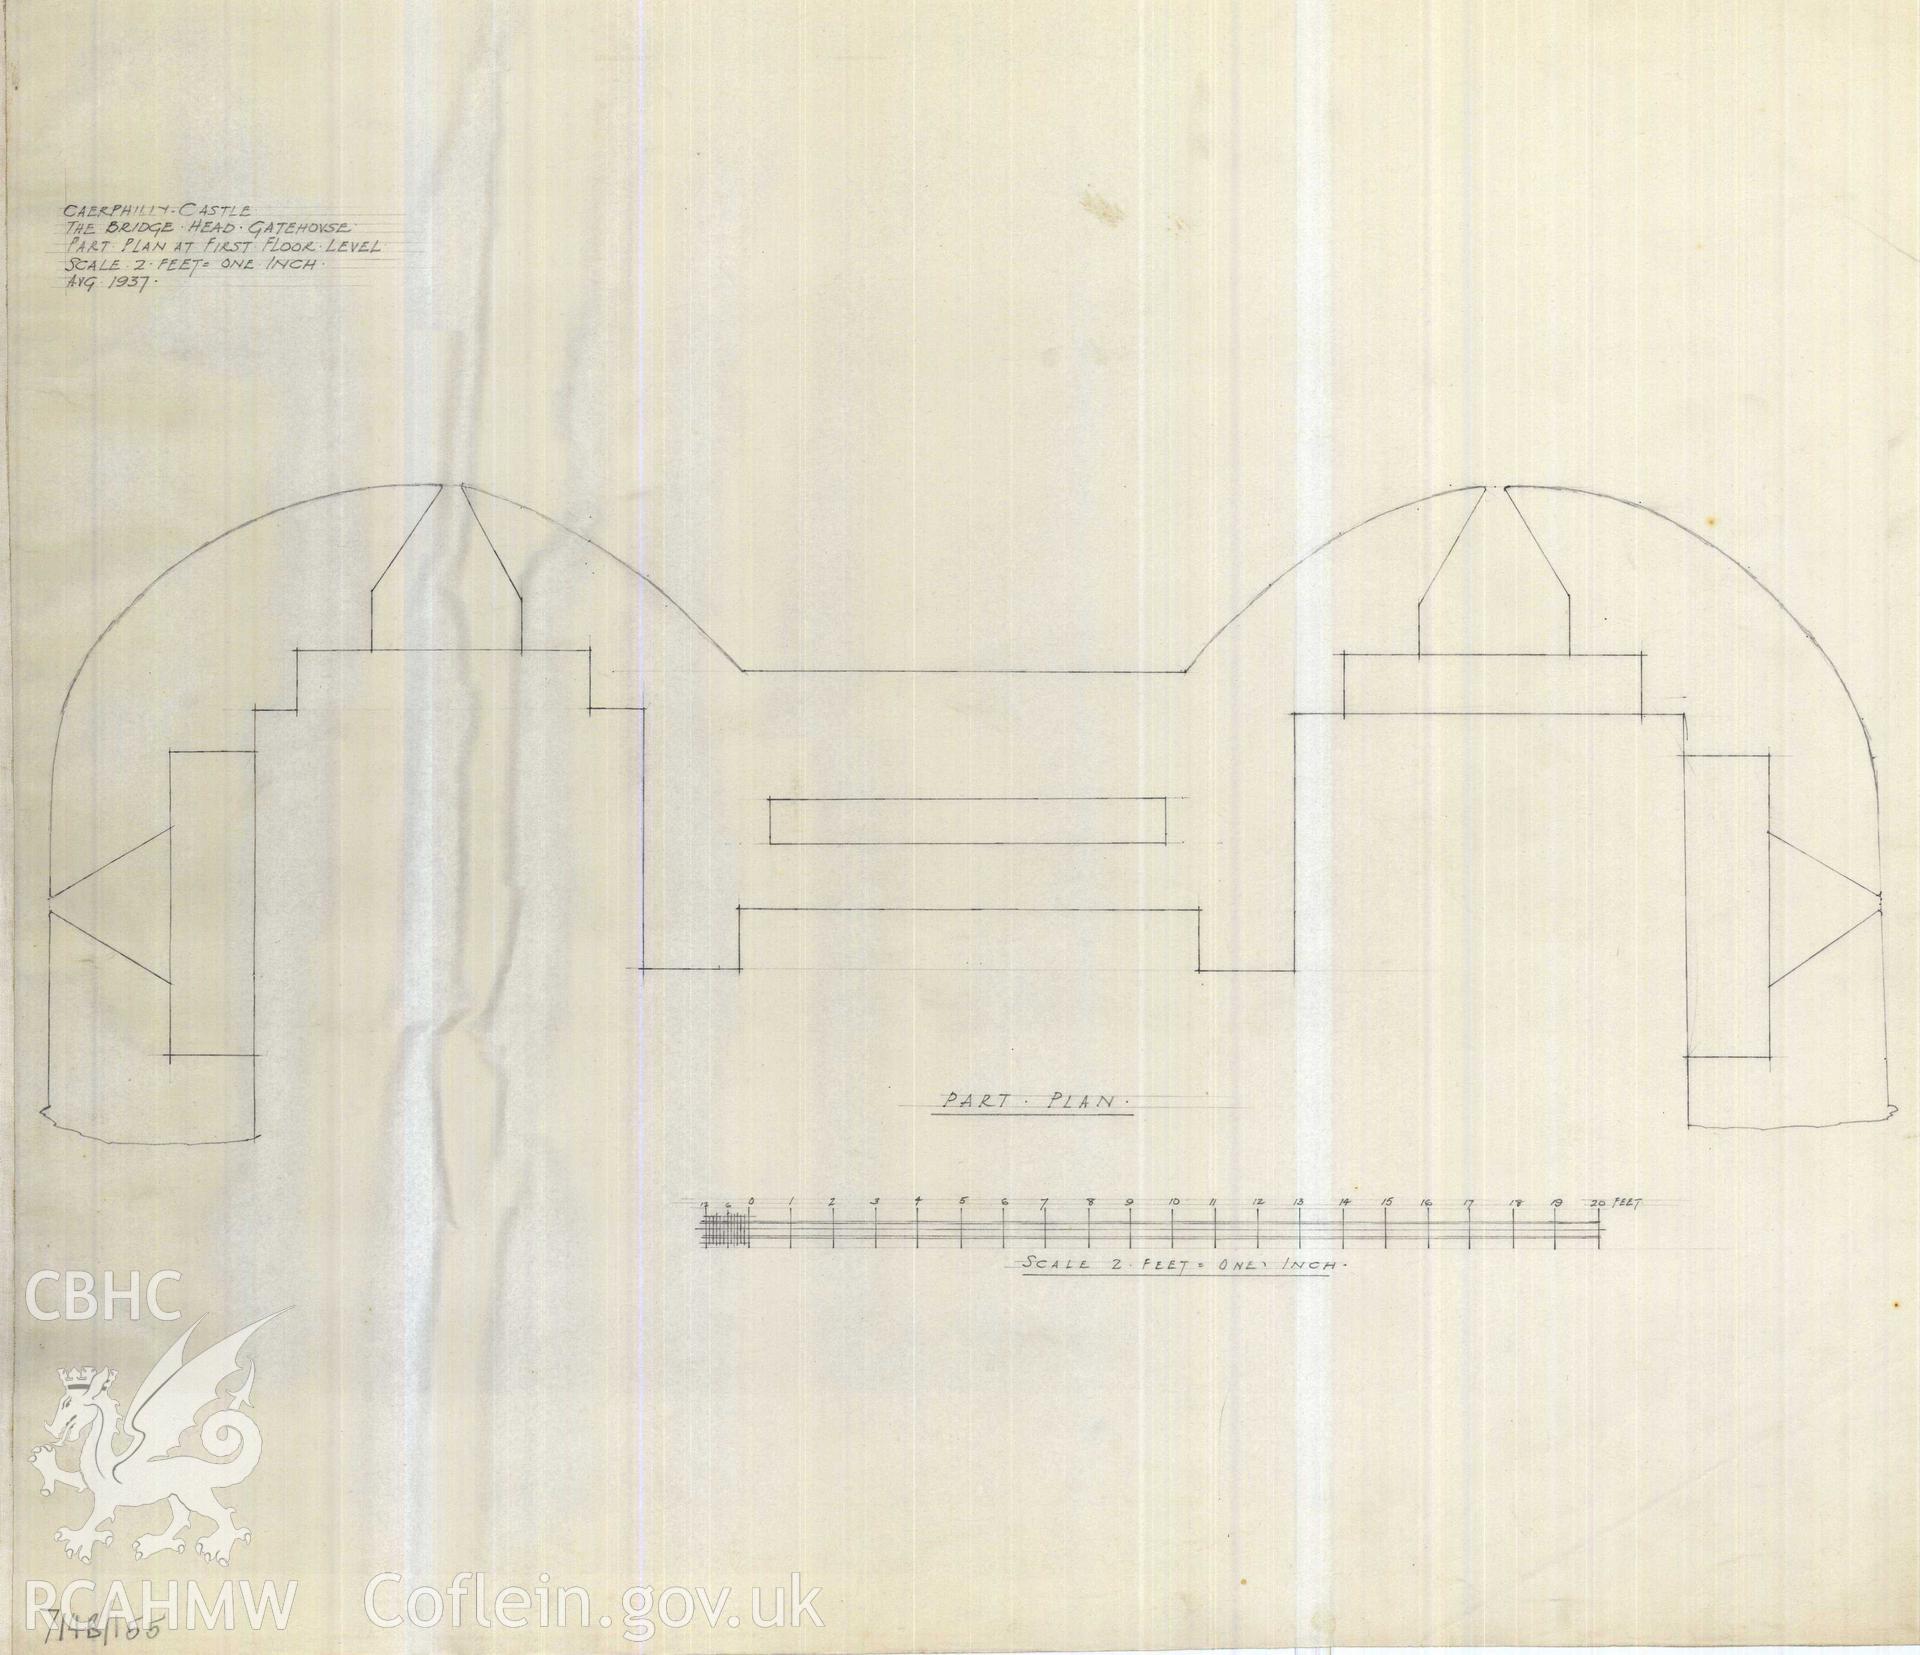 Cadw guardianship monument drawing of Caerphilly Castle. Dam, S gate, upper floor plan, W. Cadw Ref. No:714B/155. Scale 1:24.